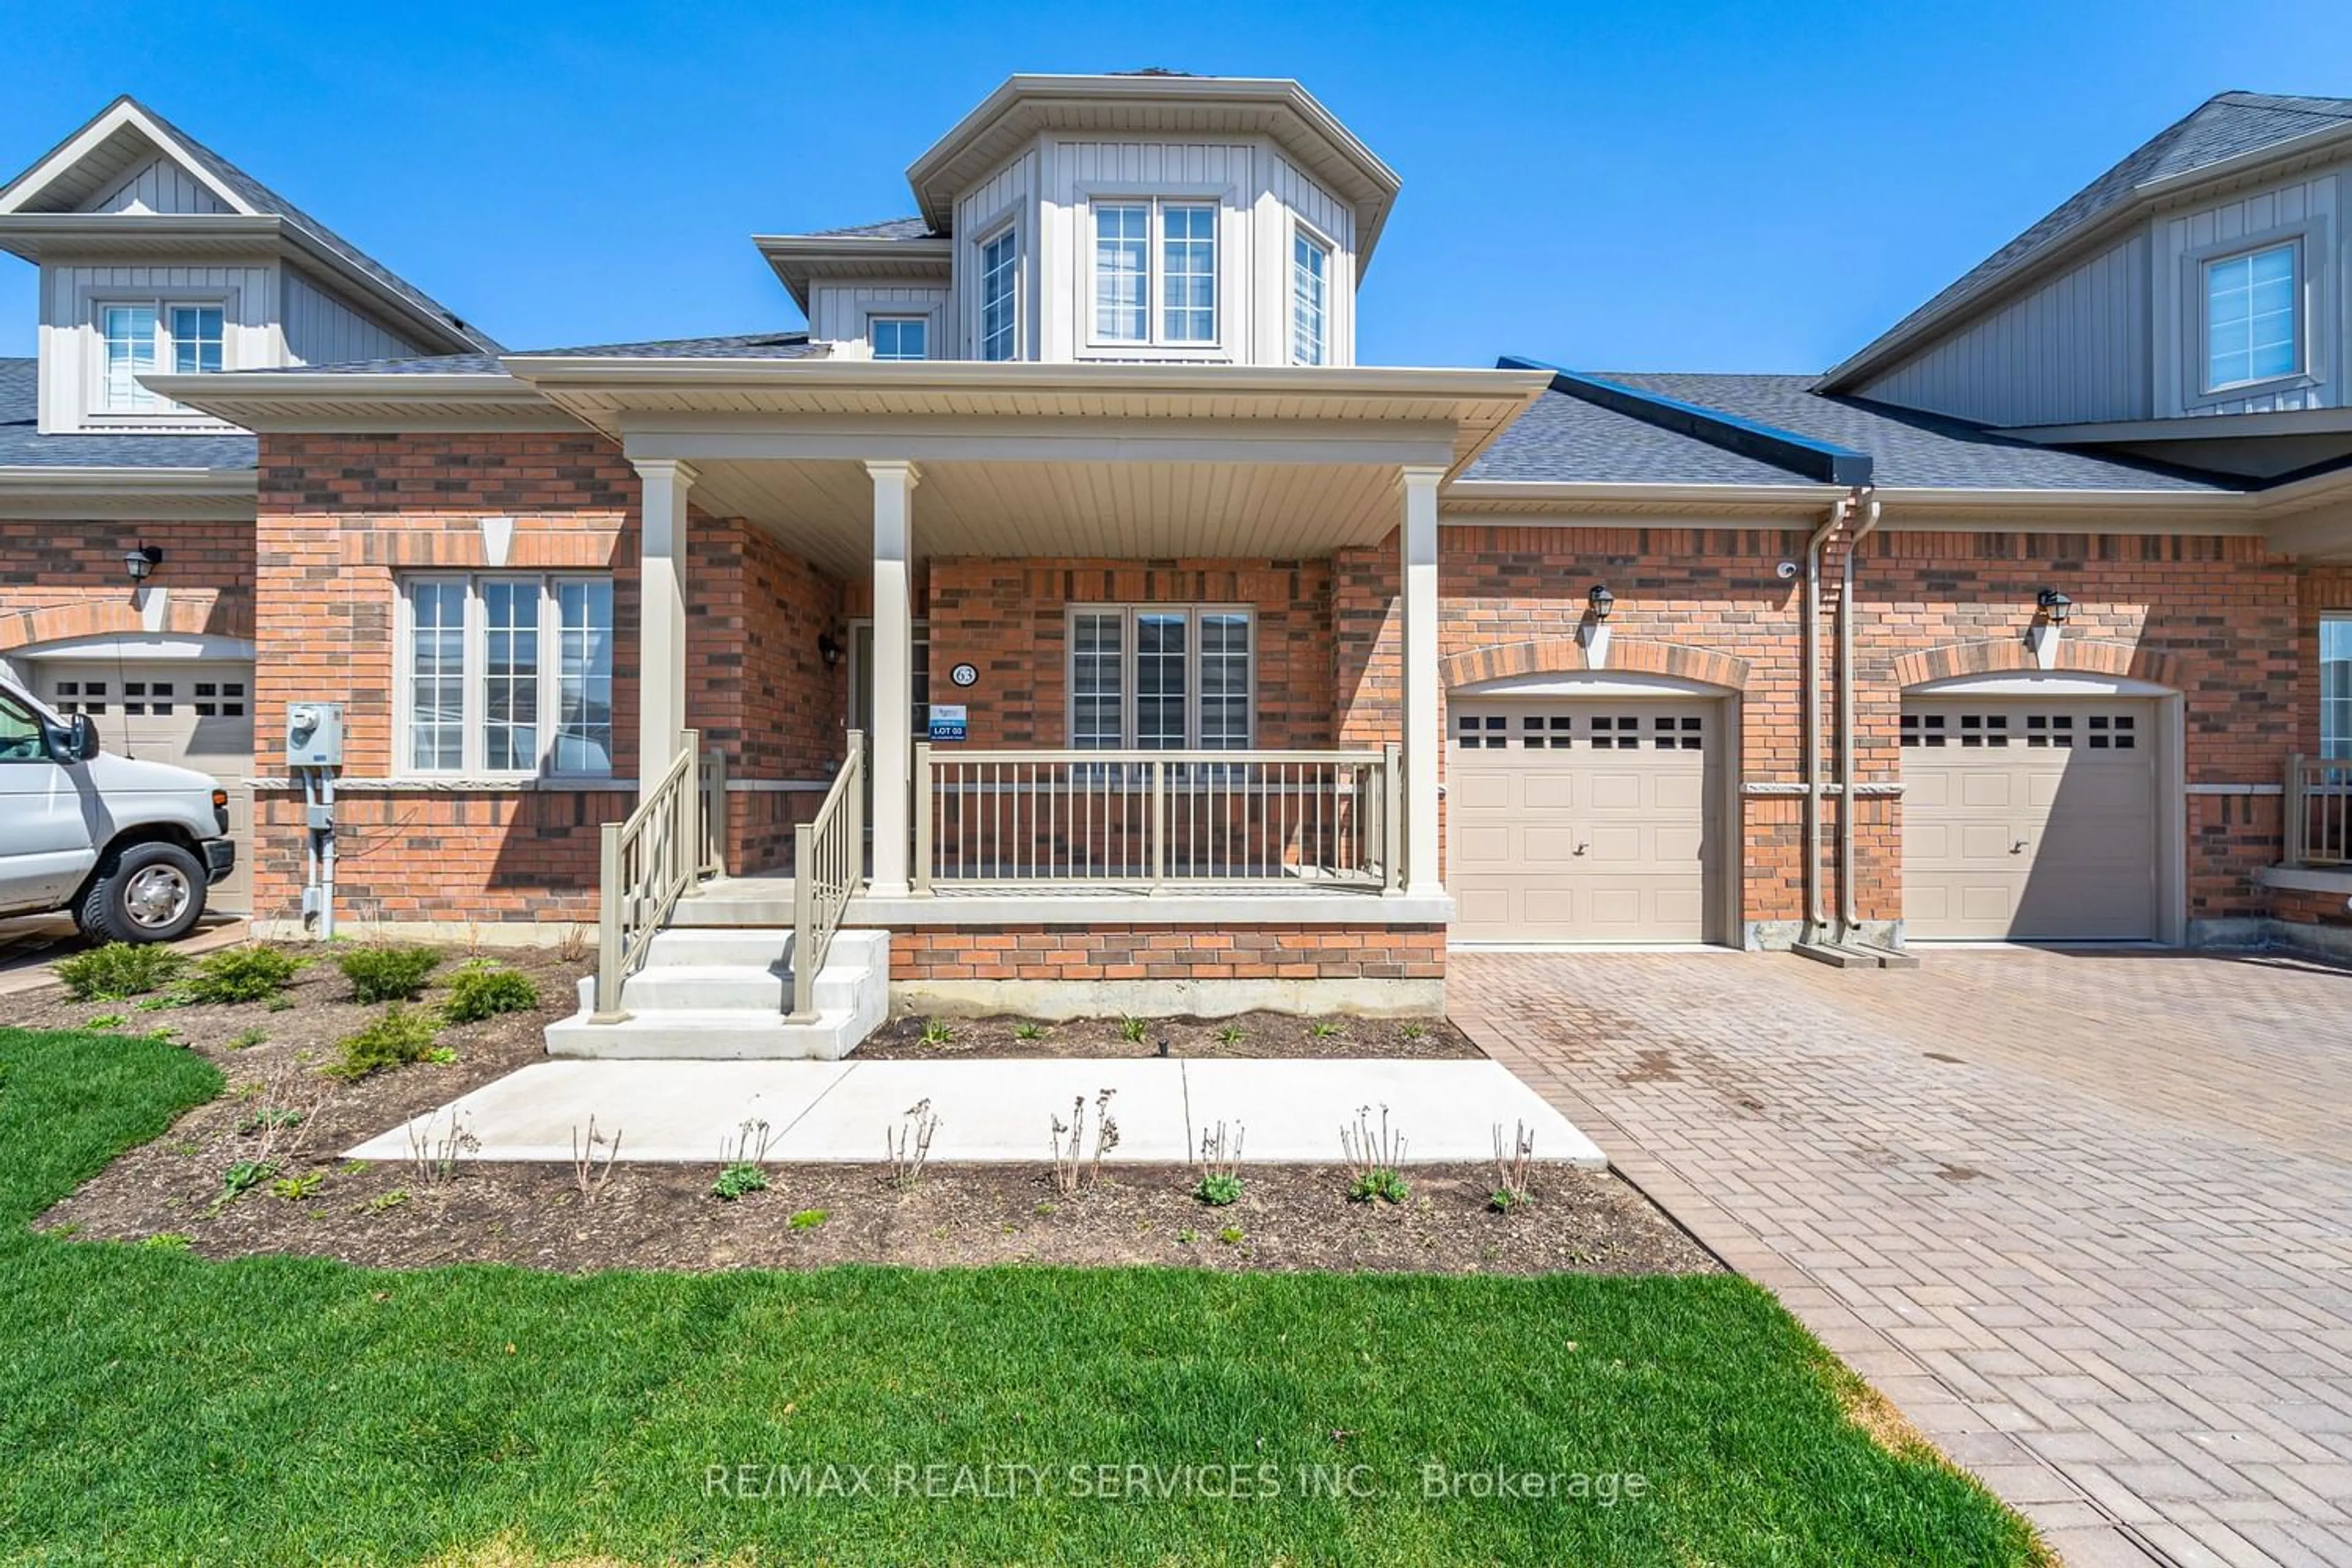 Home with brick exterior material for 63 Jazzberry Rd, Brampton Ontario L6R 0W2